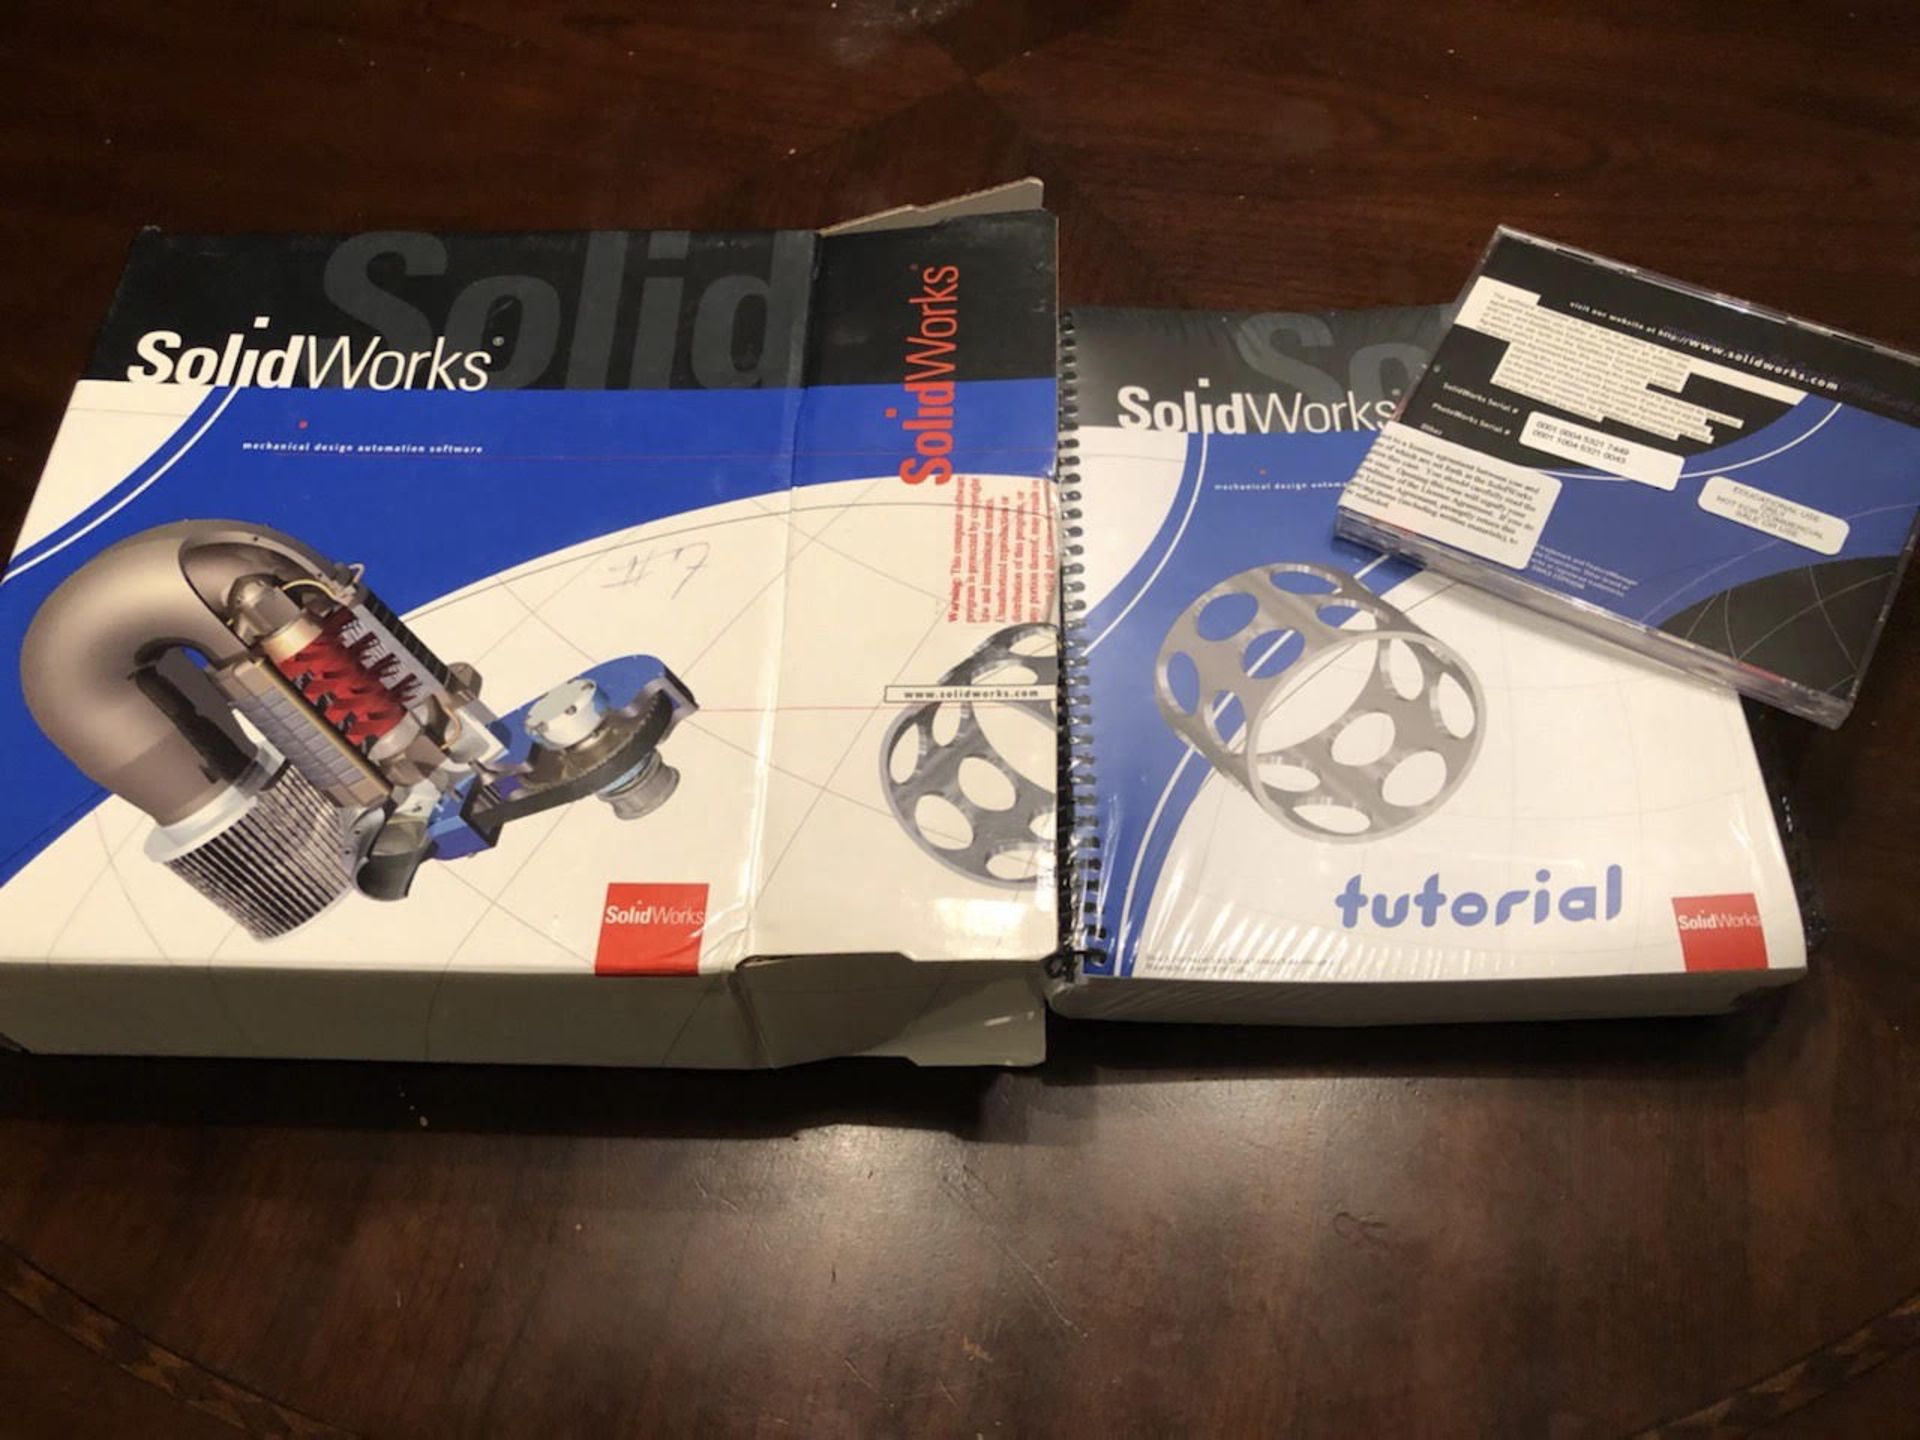 Complete set of SolidWorks, including software disc, key codes and manuals.